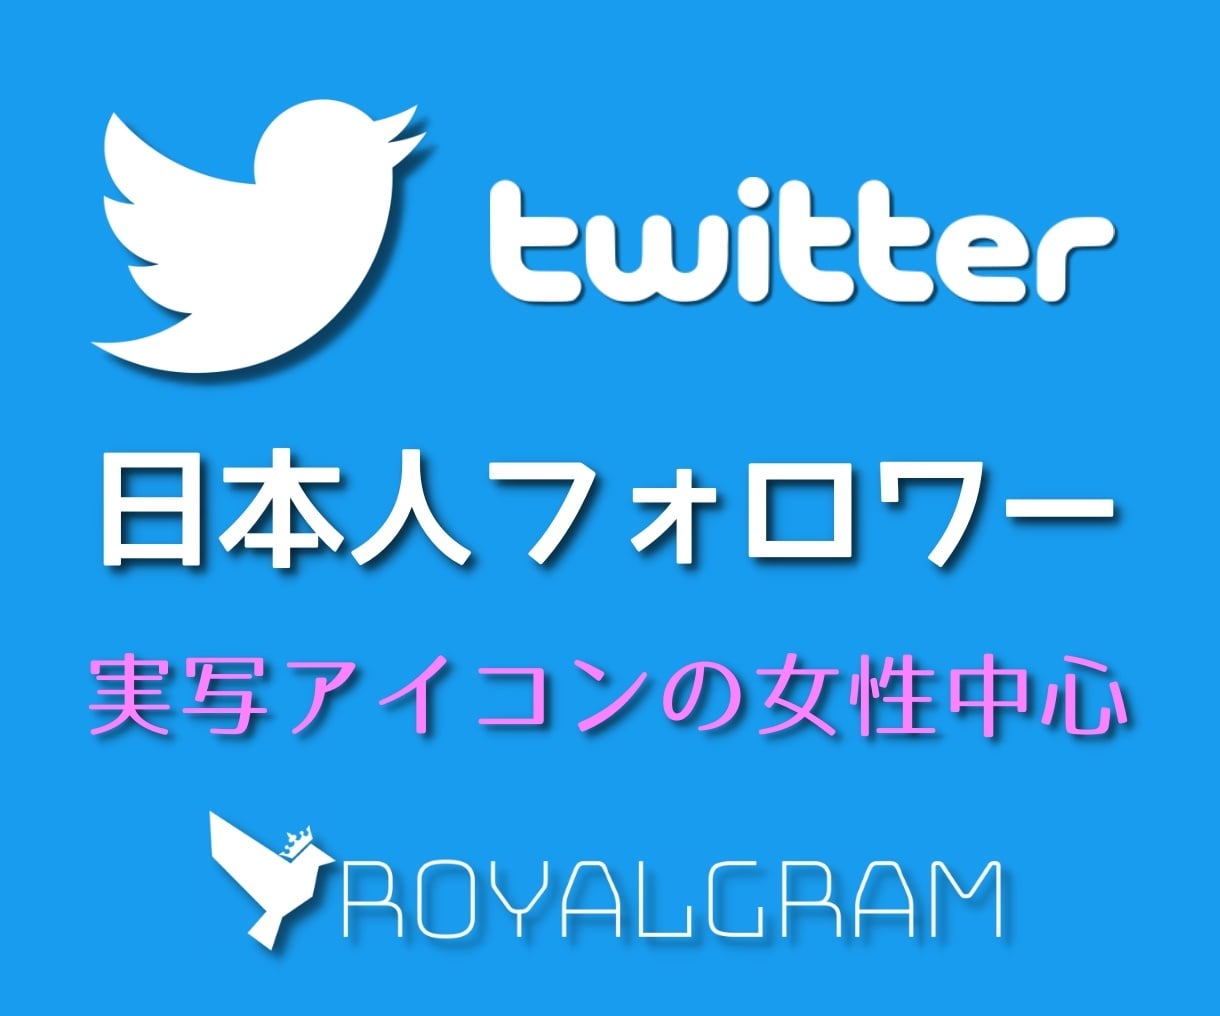 💬Coconara｜Increase the number of Japanese female followers of X Royal Glam 5.0…